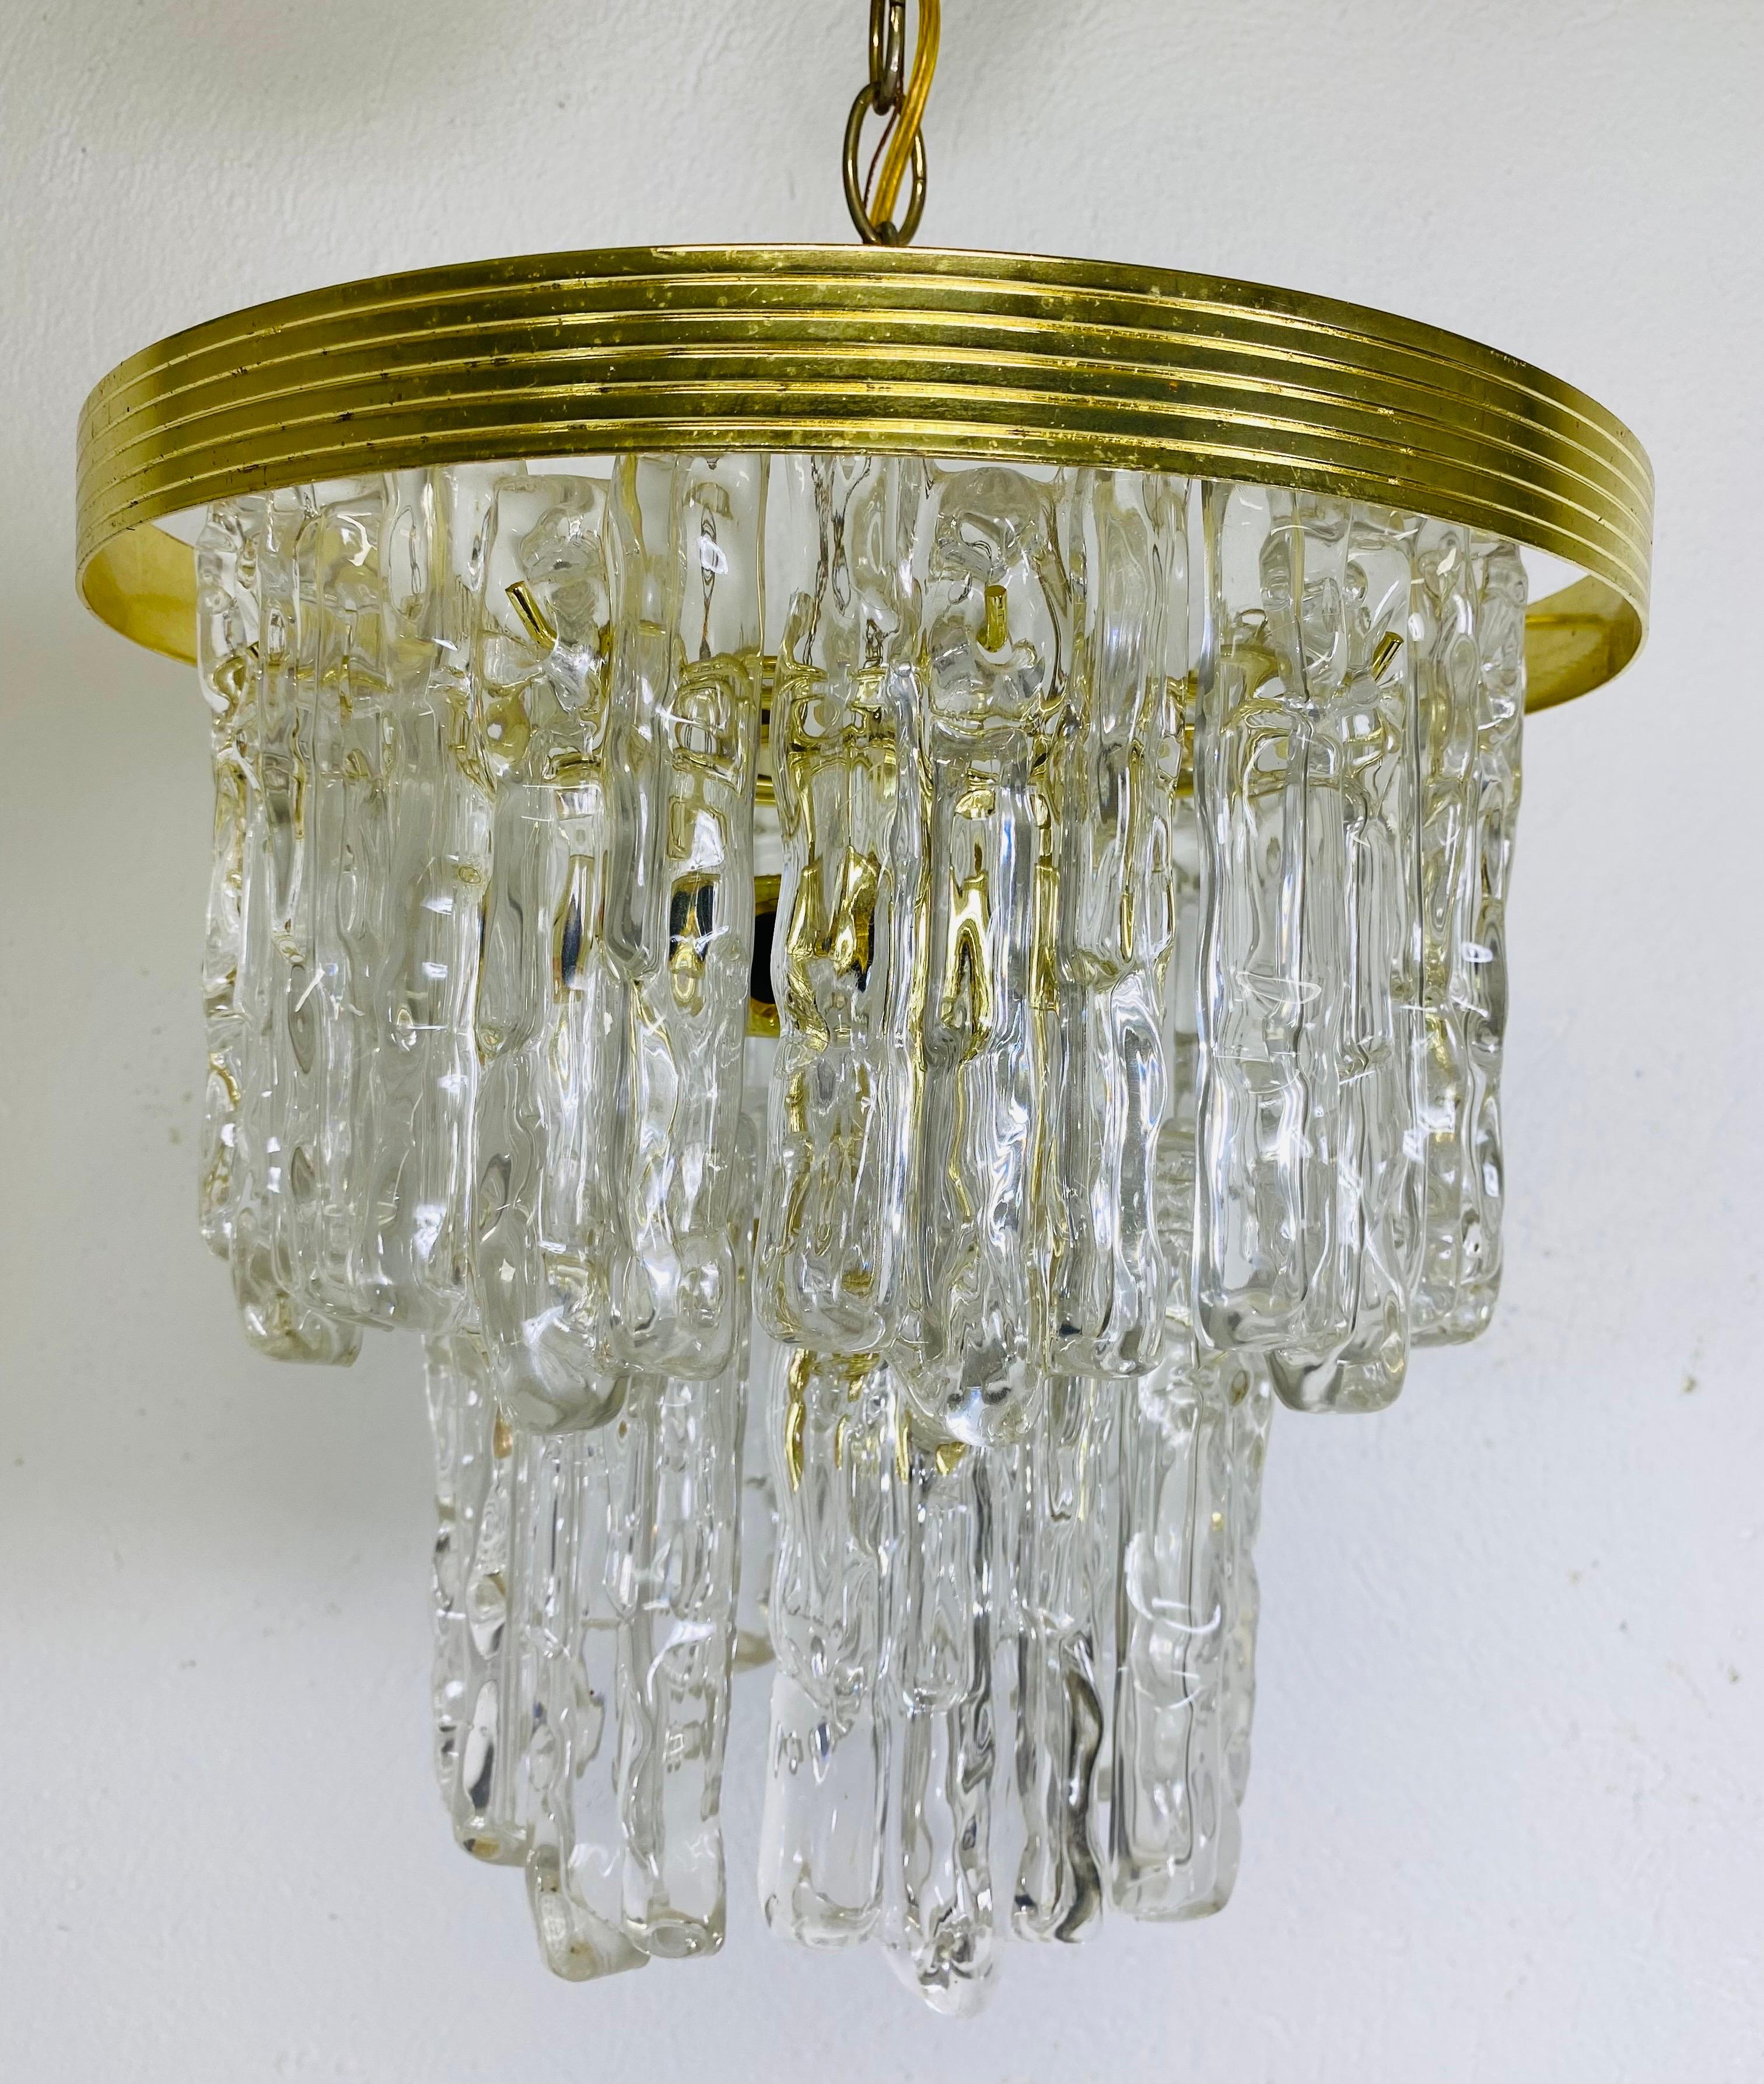 Vintage Mid-Century Modern Lucite and Brass Waterfall Style Chandelier For Sale 1